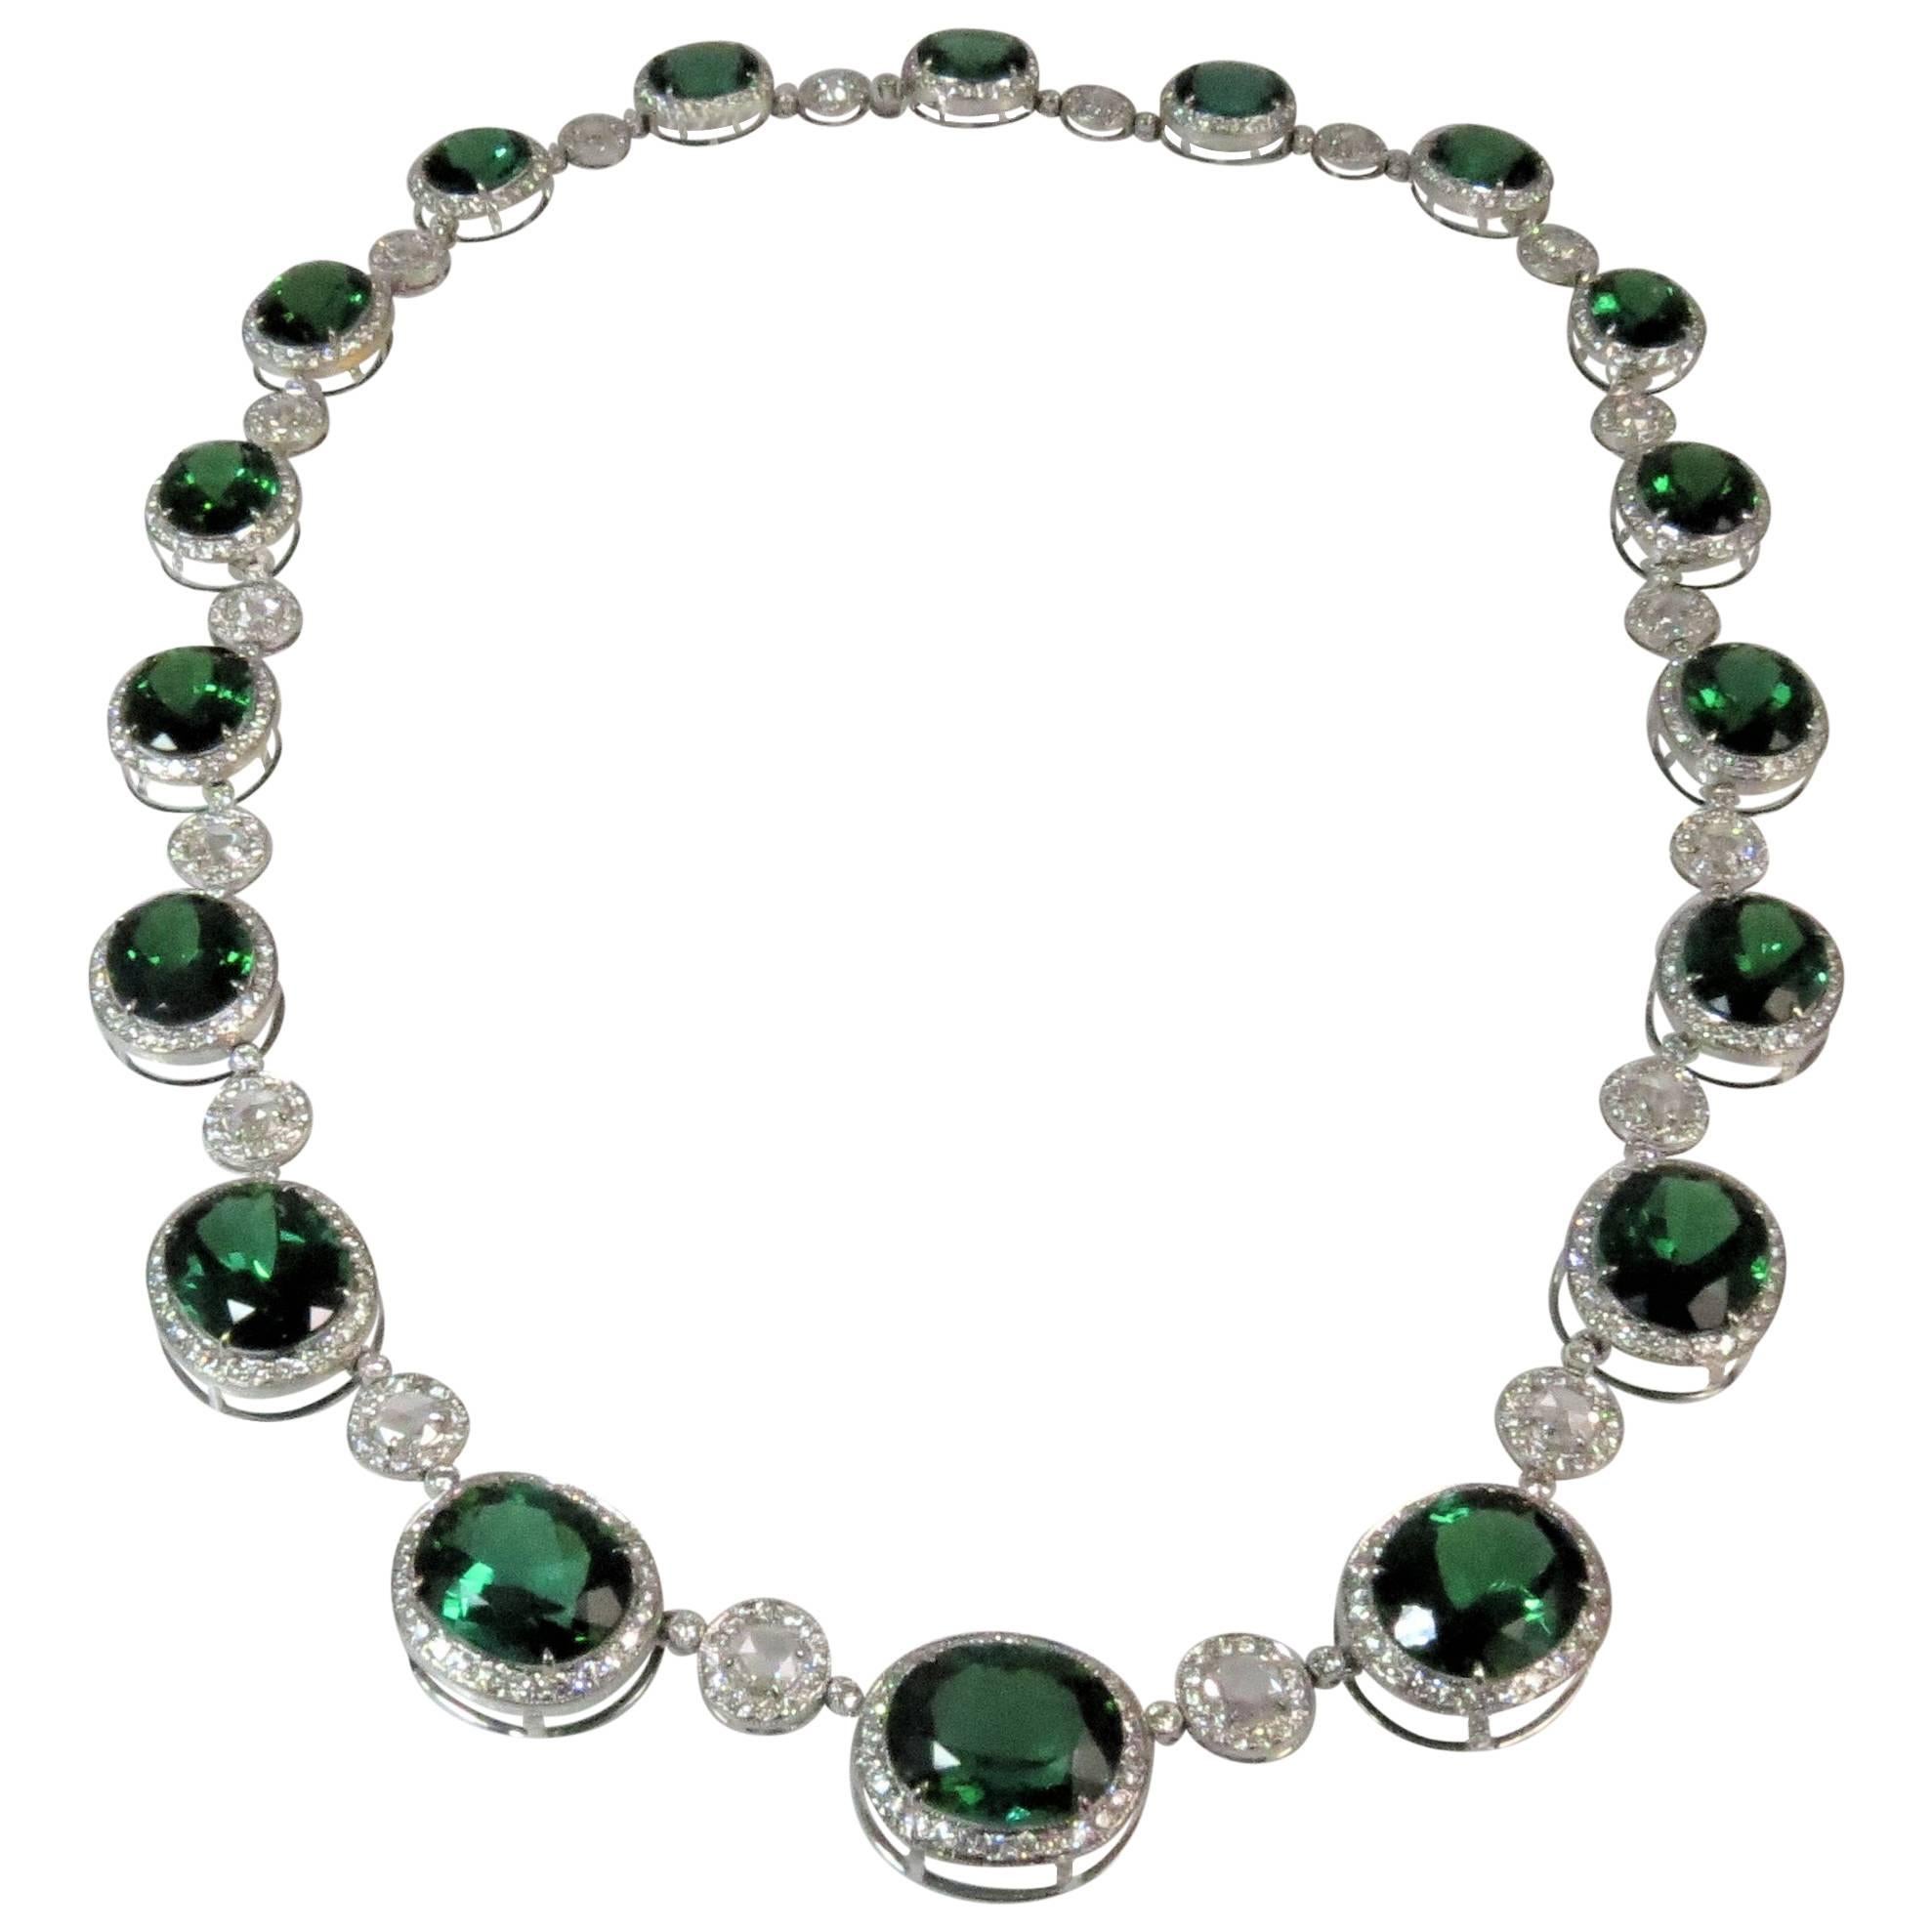 18 Karat White Gold Necklace with Green Tourmalines and Rosecut Diamonds